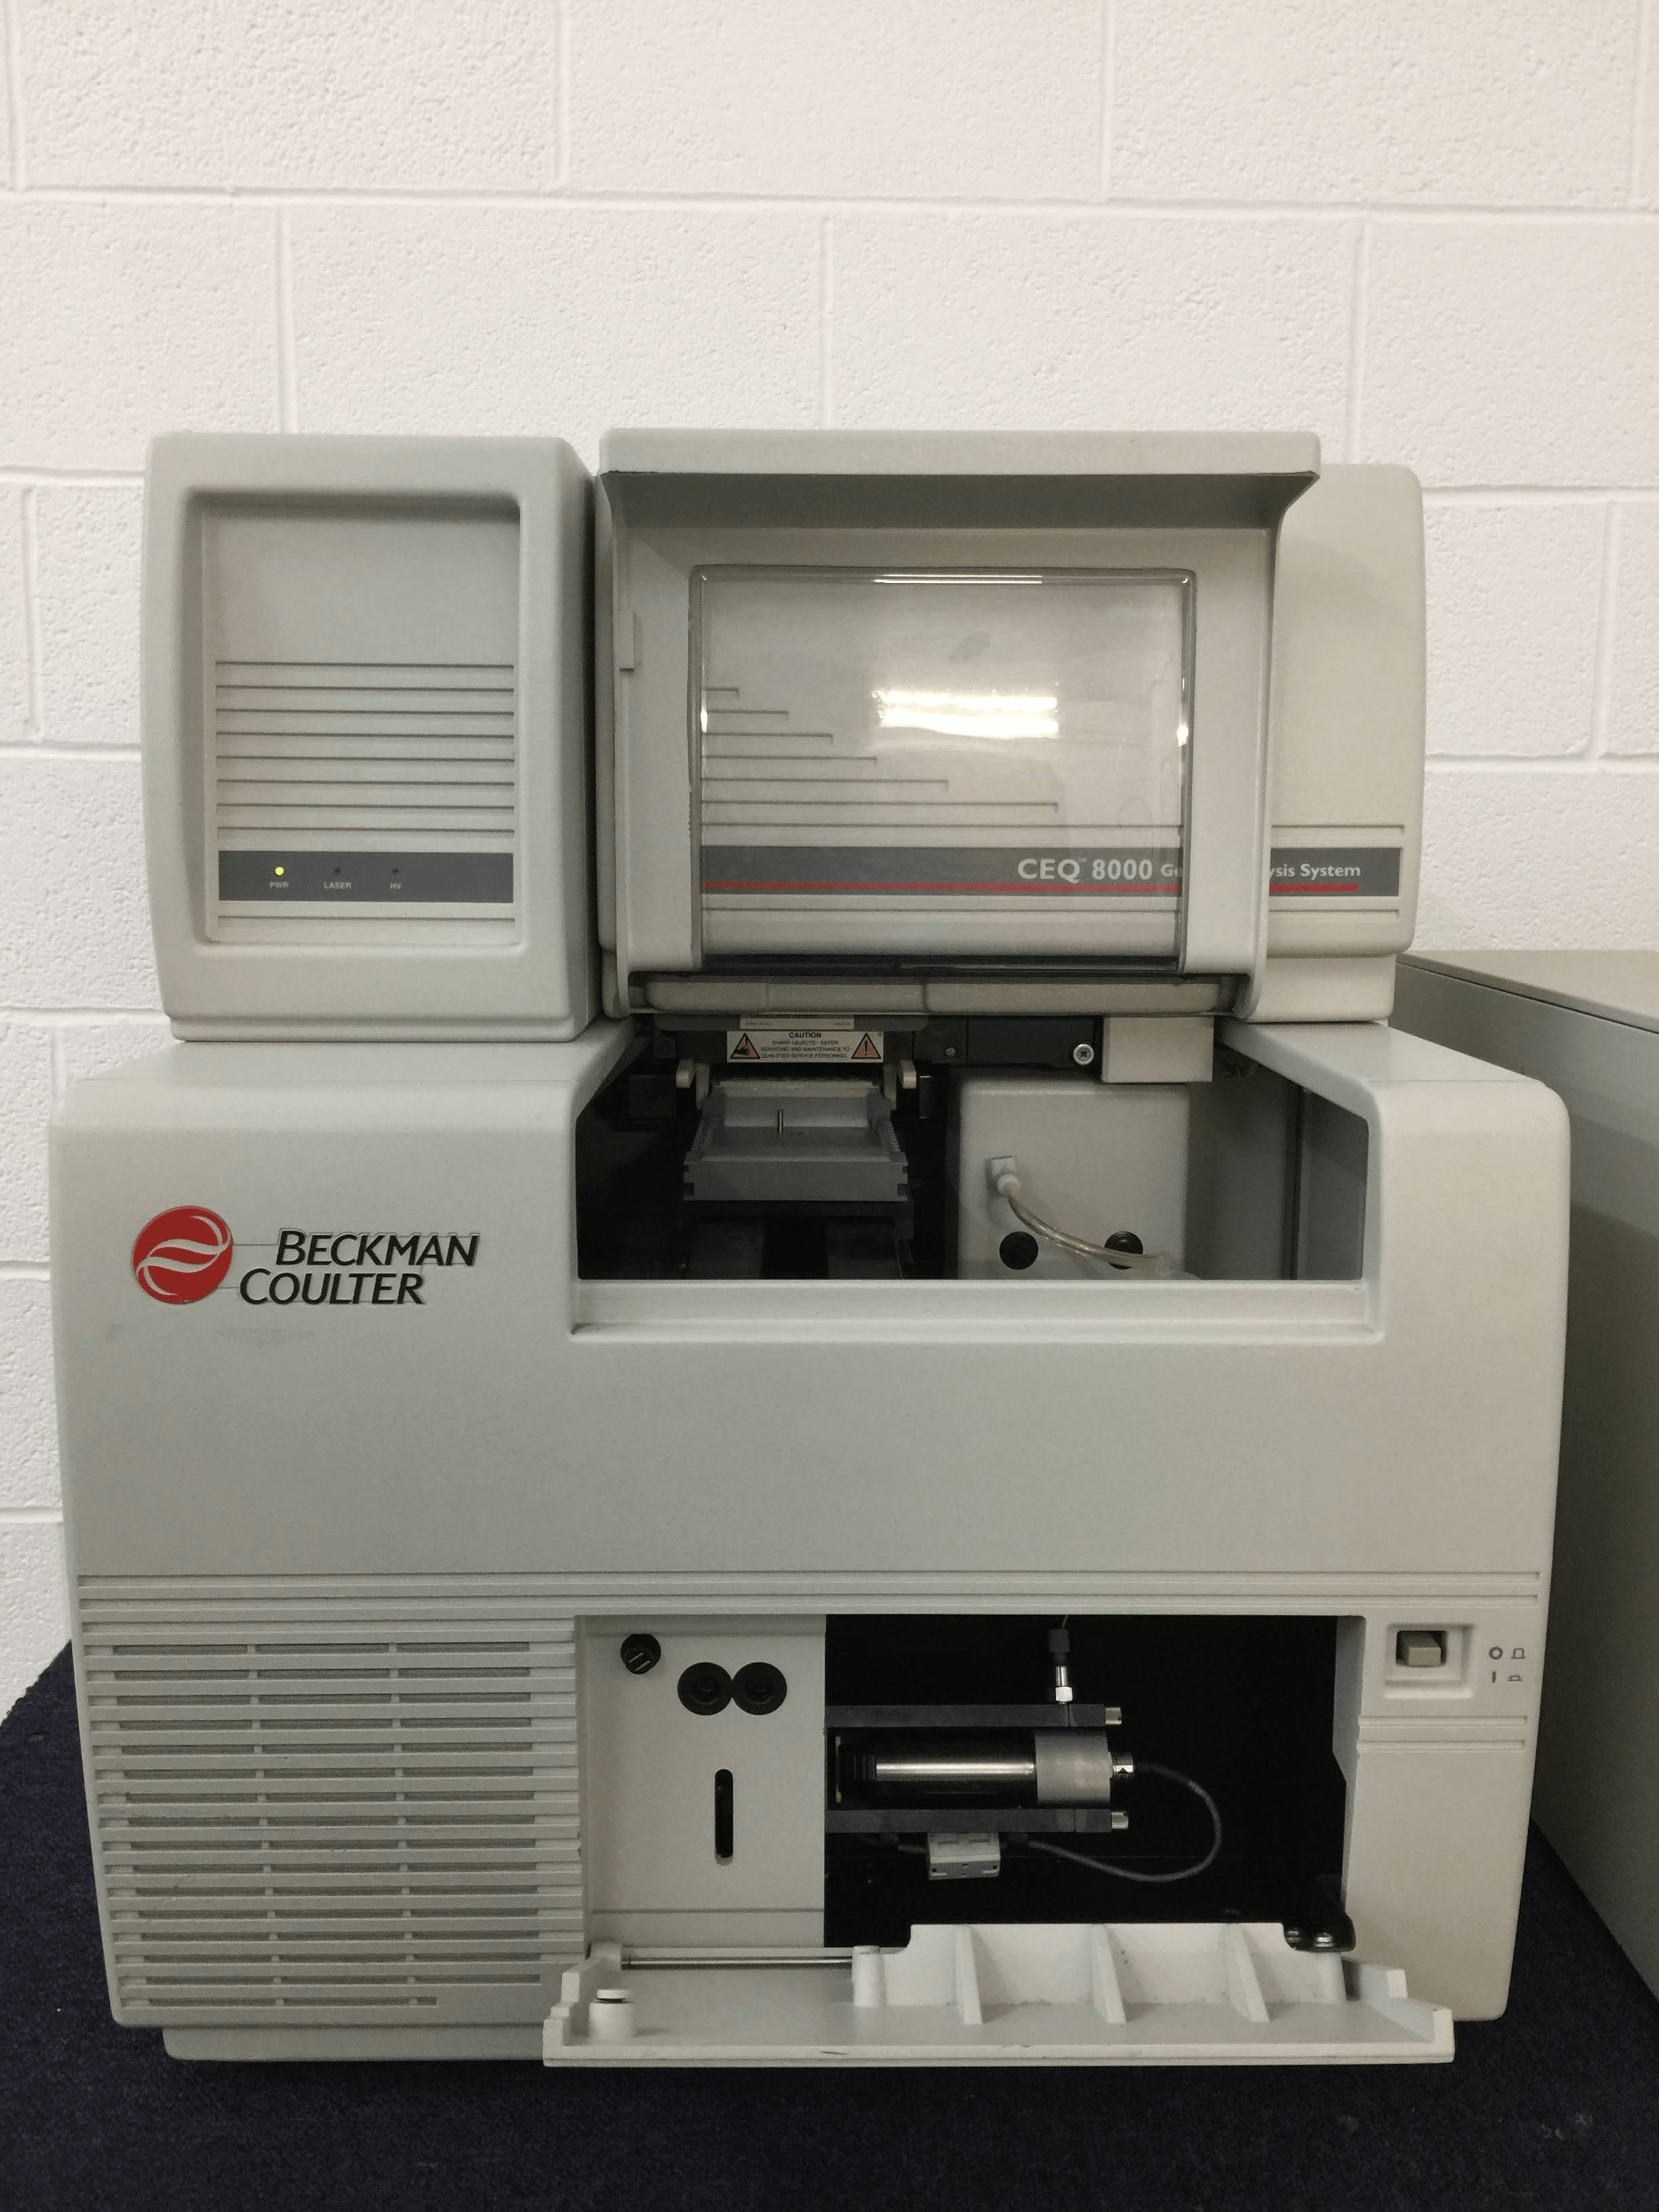 beckman coulter ceq 8000 genetic analysis system